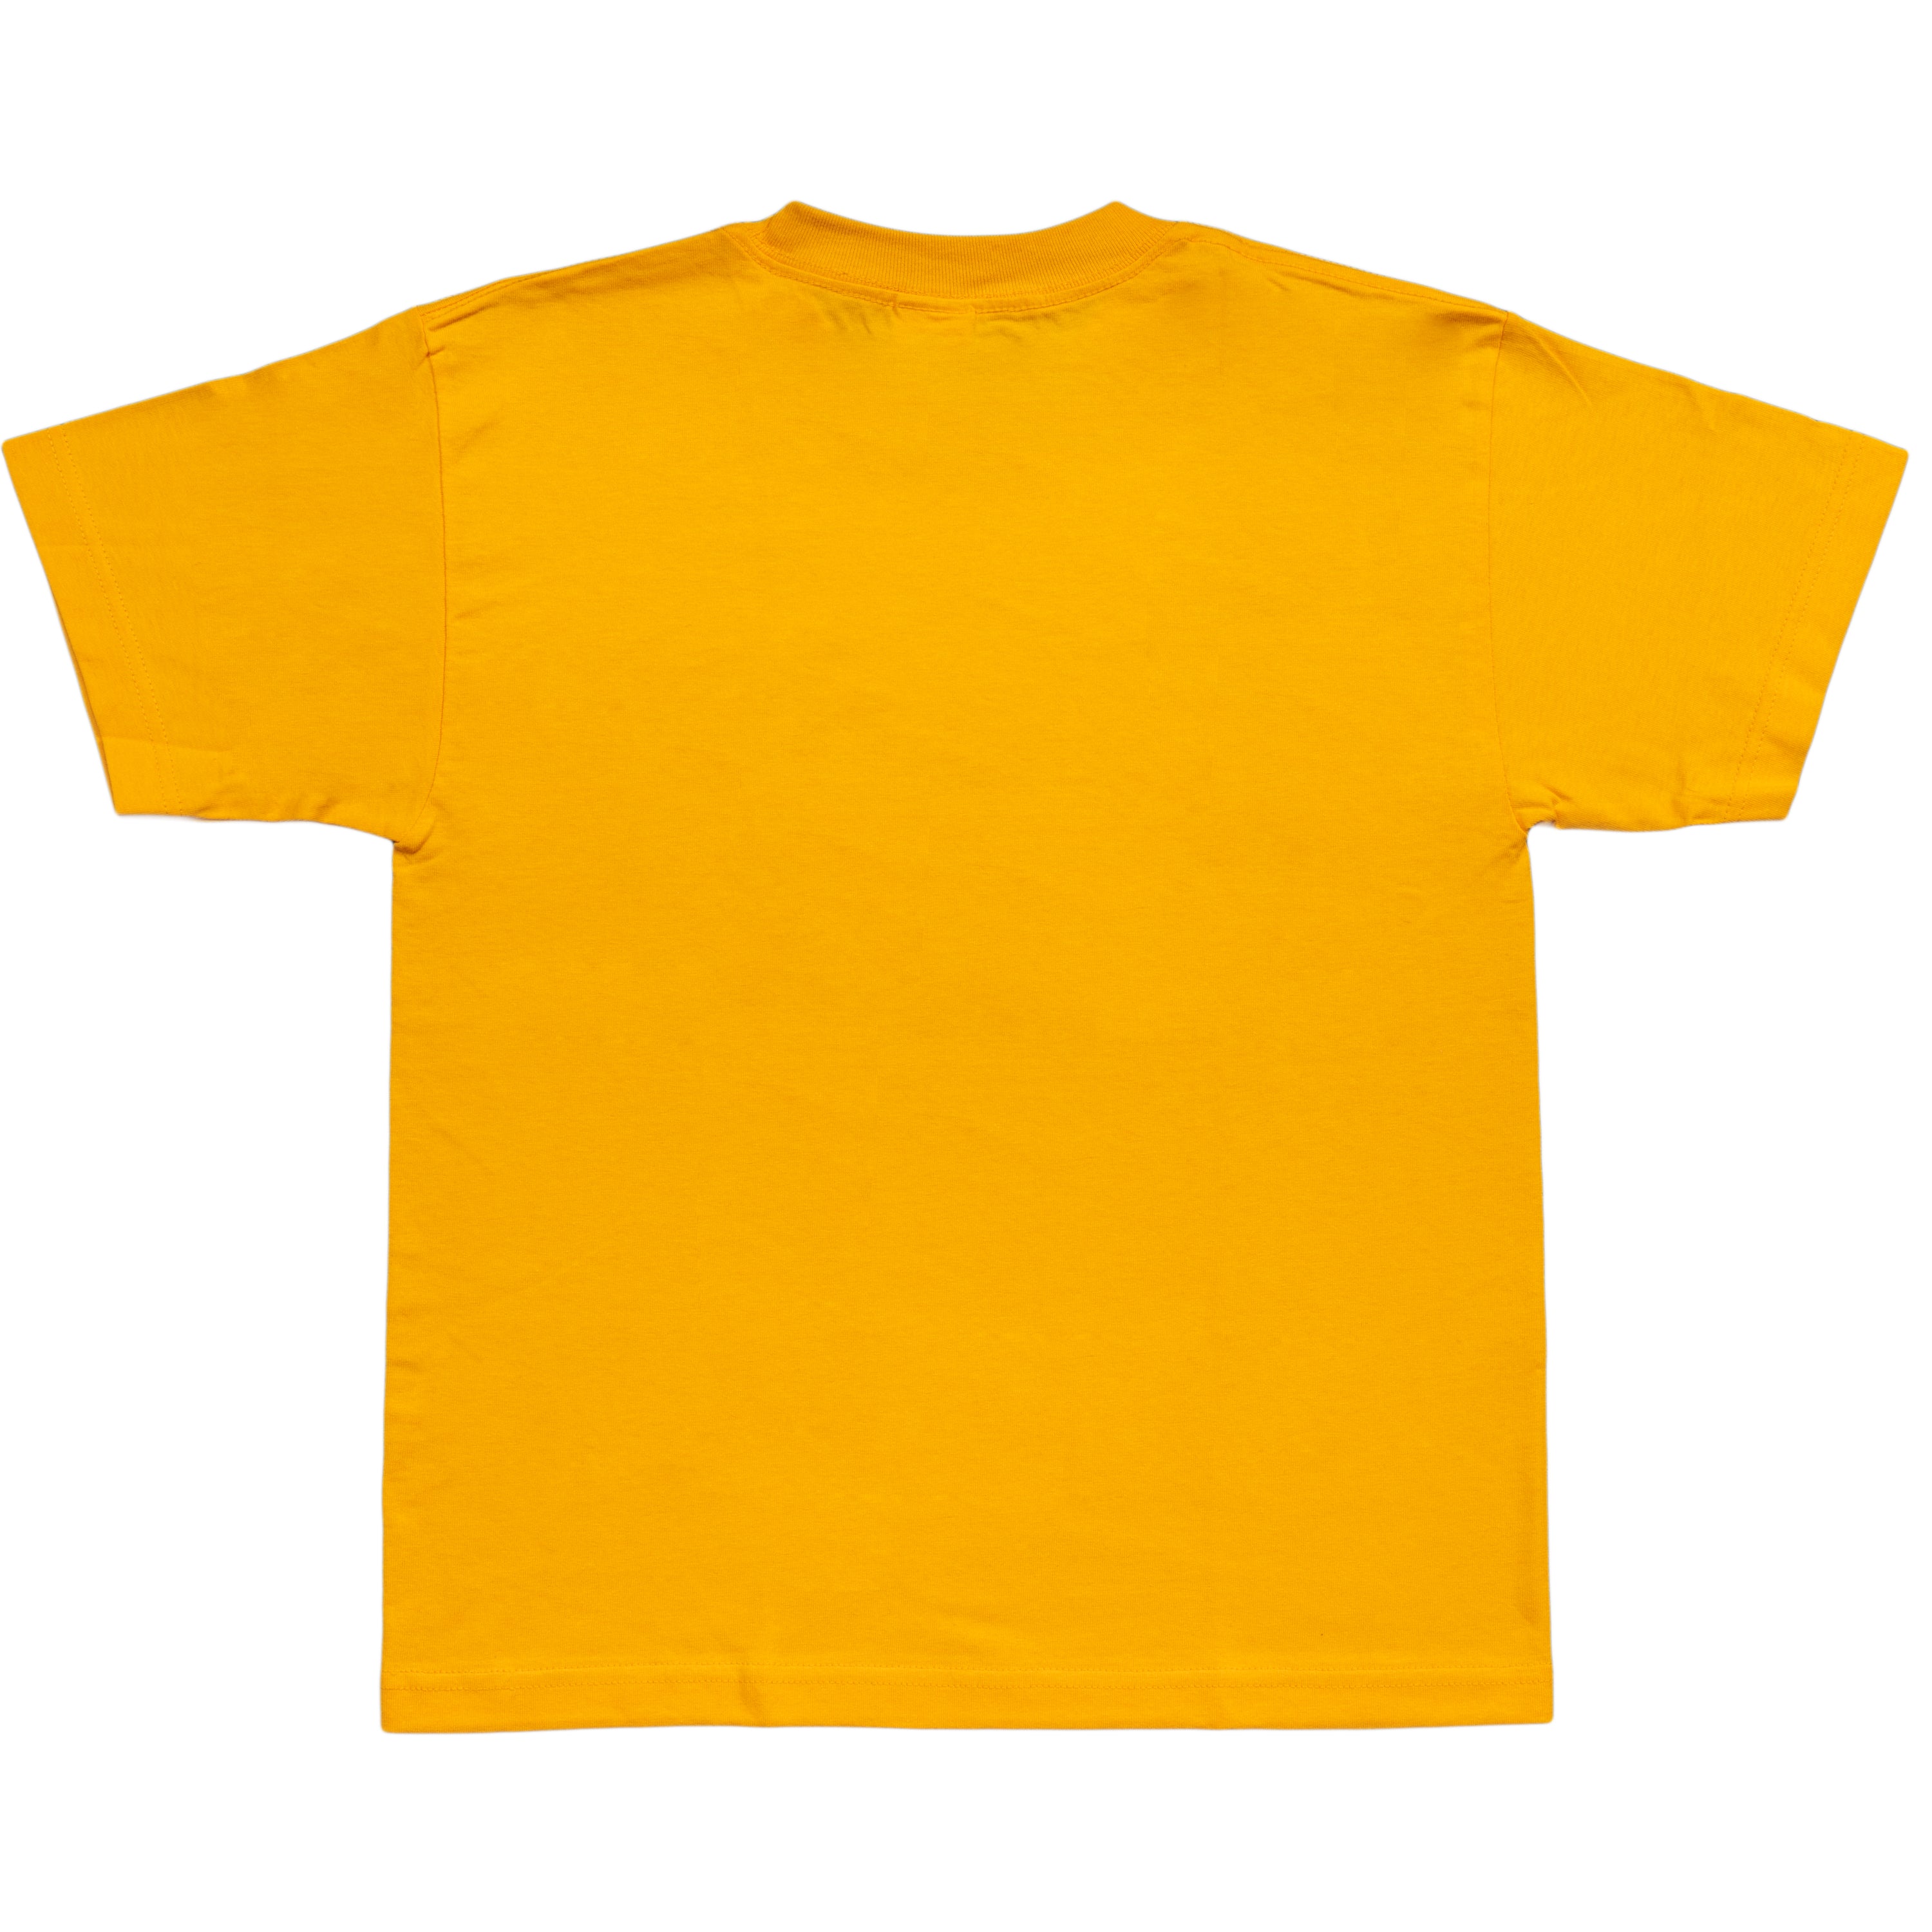 Dukes of Hazzard The General Lee little bit more than the law will allow Youth Yellow T-Shirt